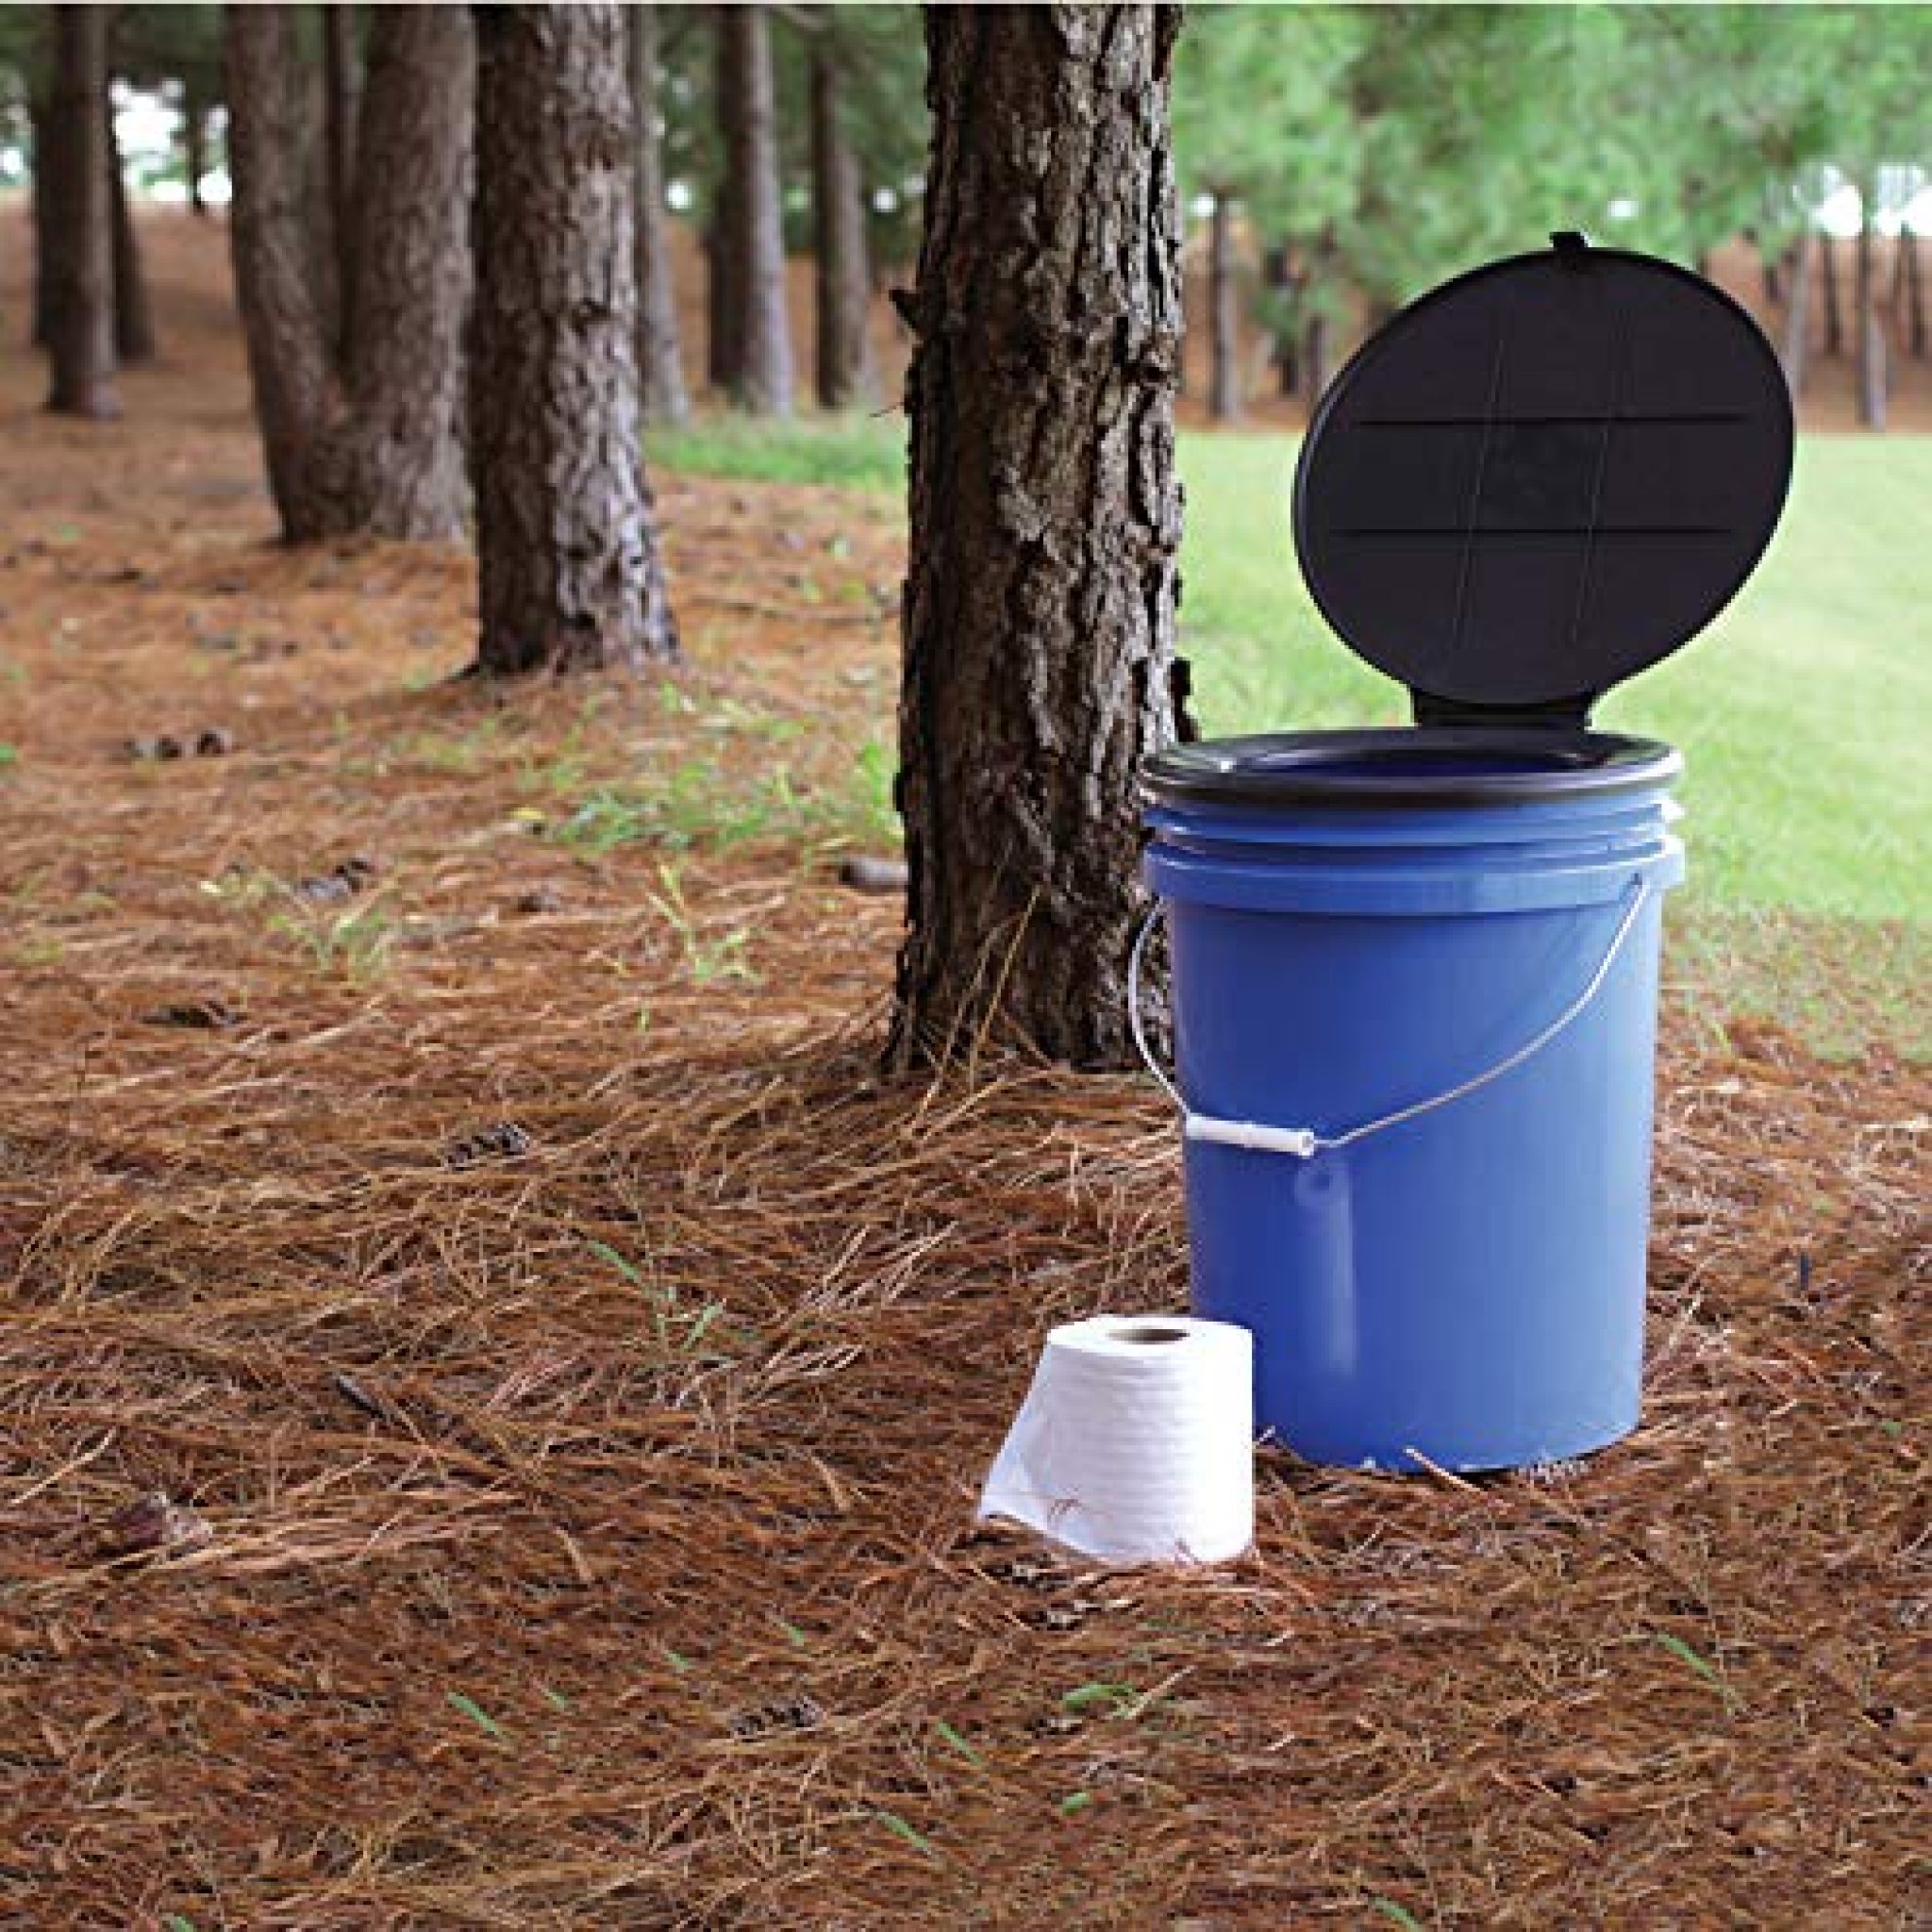 5 Gallon Bucket Toilet Seat With Lid With Leak Proof Waste Bags Great For Work Camping Hiking Hunting And More 3 2048x2048 